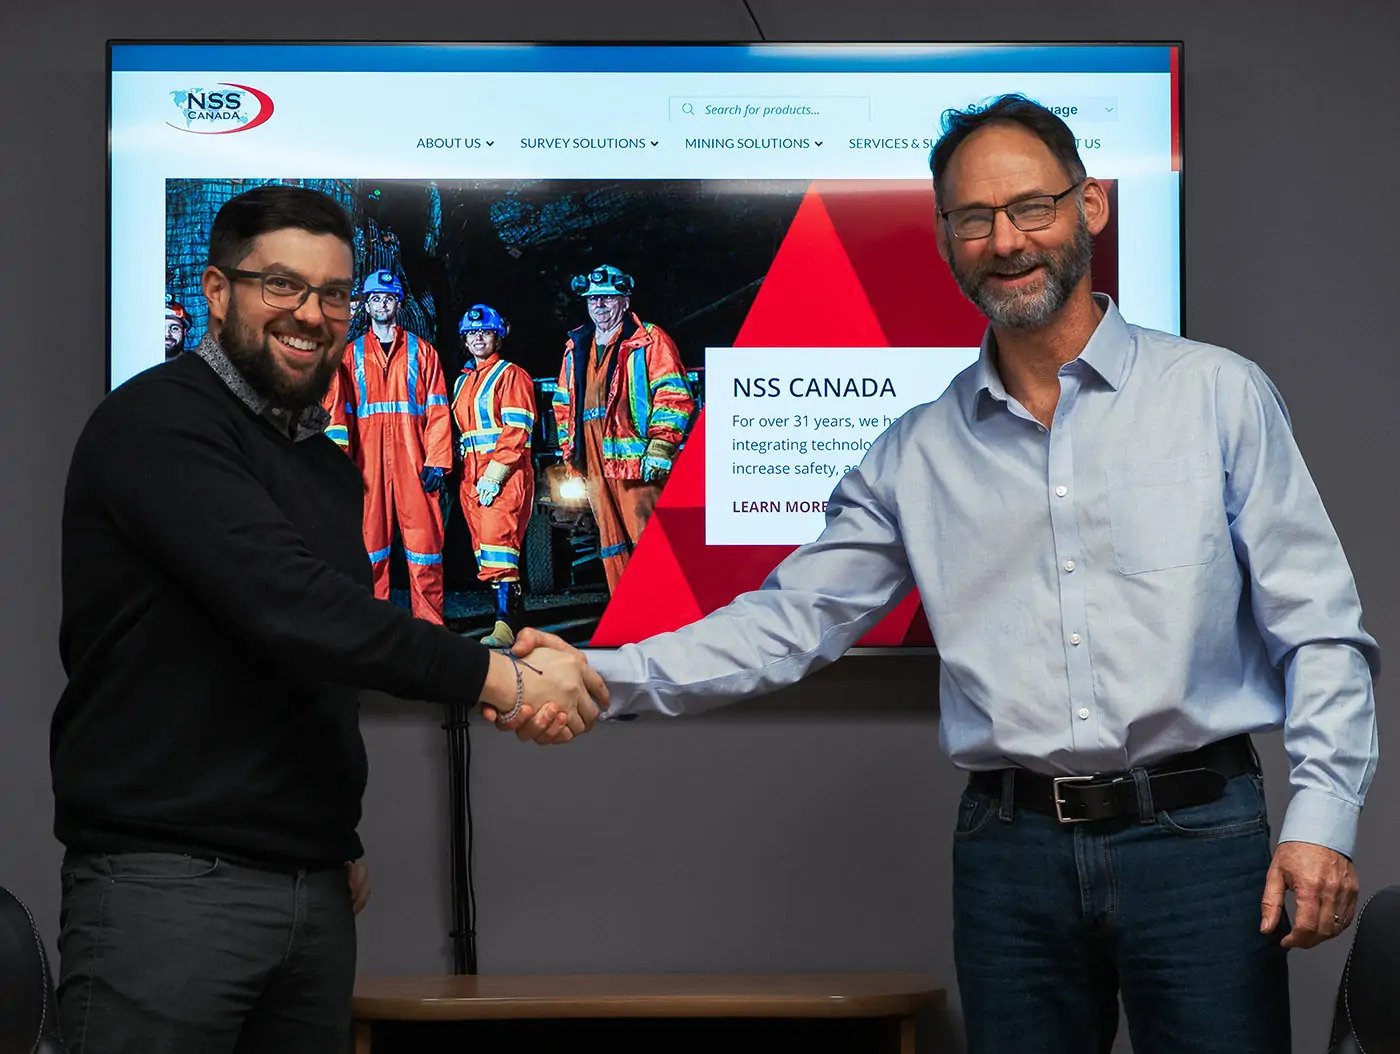 Bruno Lalonde appointed as new President of NSS Canada